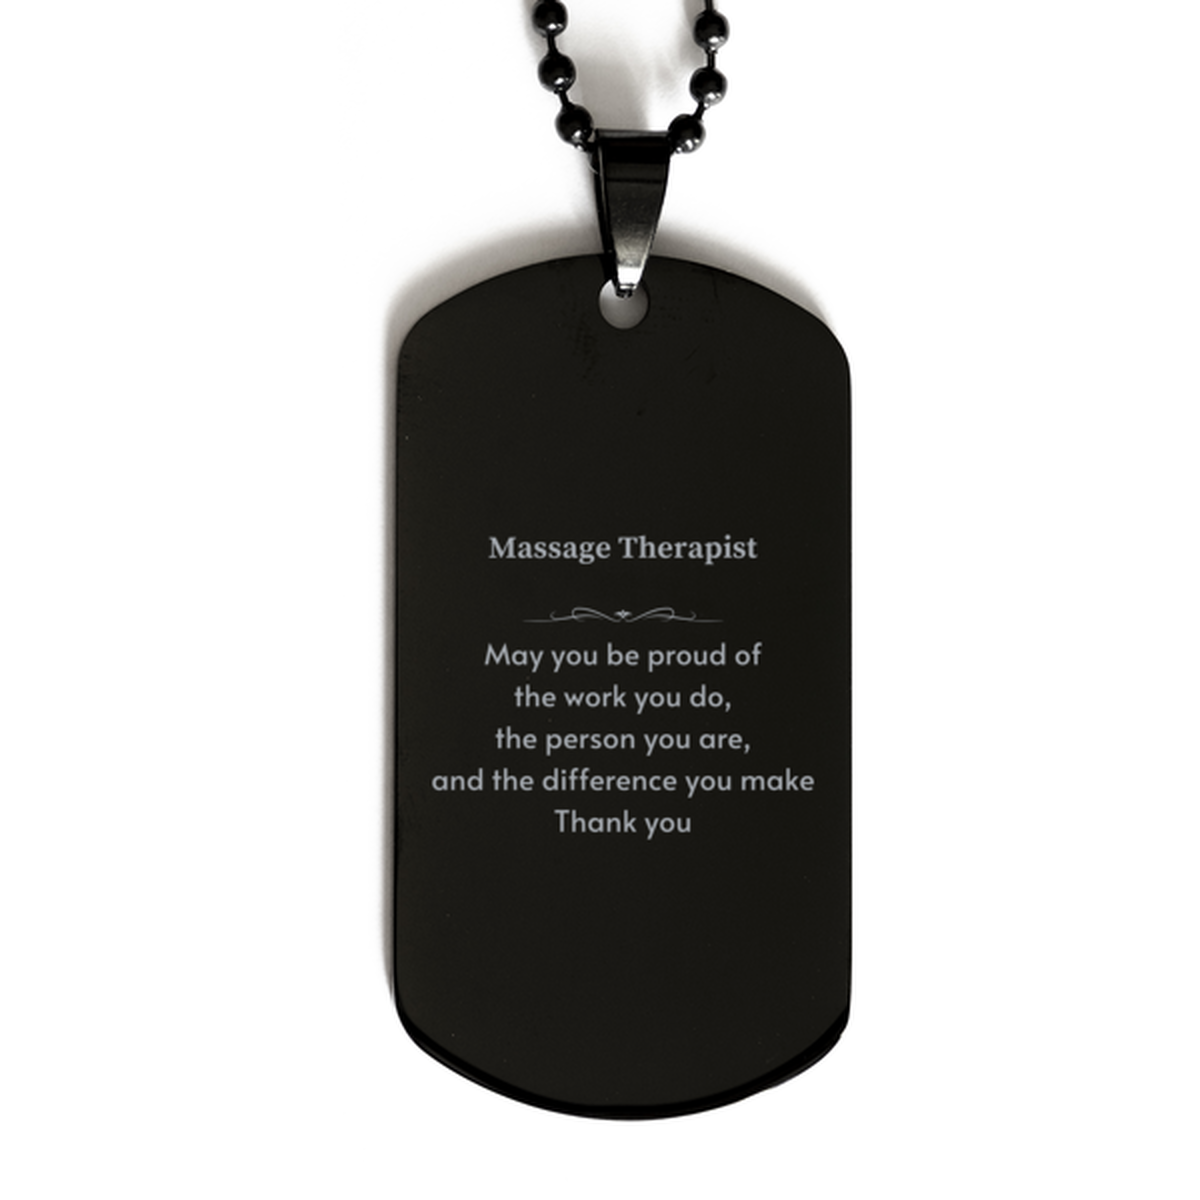 Heartwarming Black Dog Tag Retirement Coworkers Gifts for Massage Therapist, Massage Therapist May You be proud of the work you do, the person you are Gifts for Boss Men Women Friends